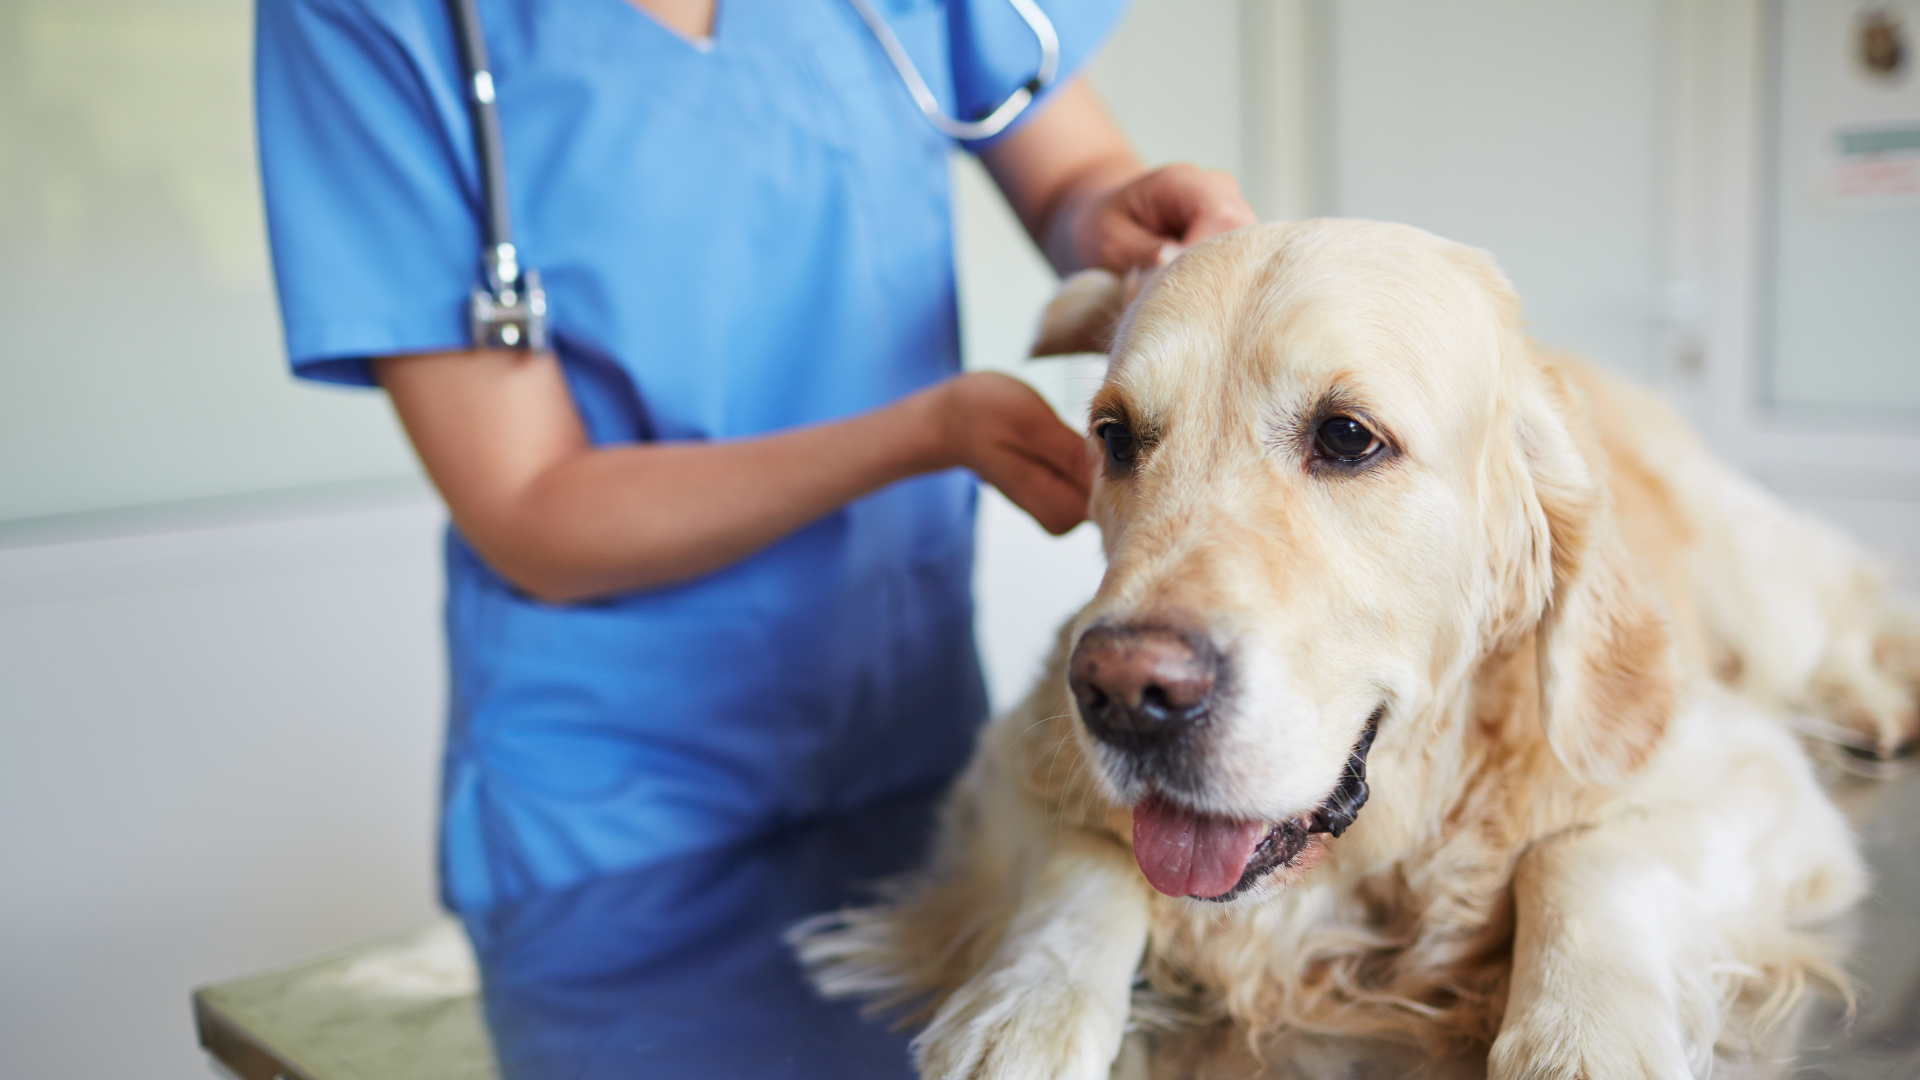 5 reasons to consider moving to veterinary whiteboard software